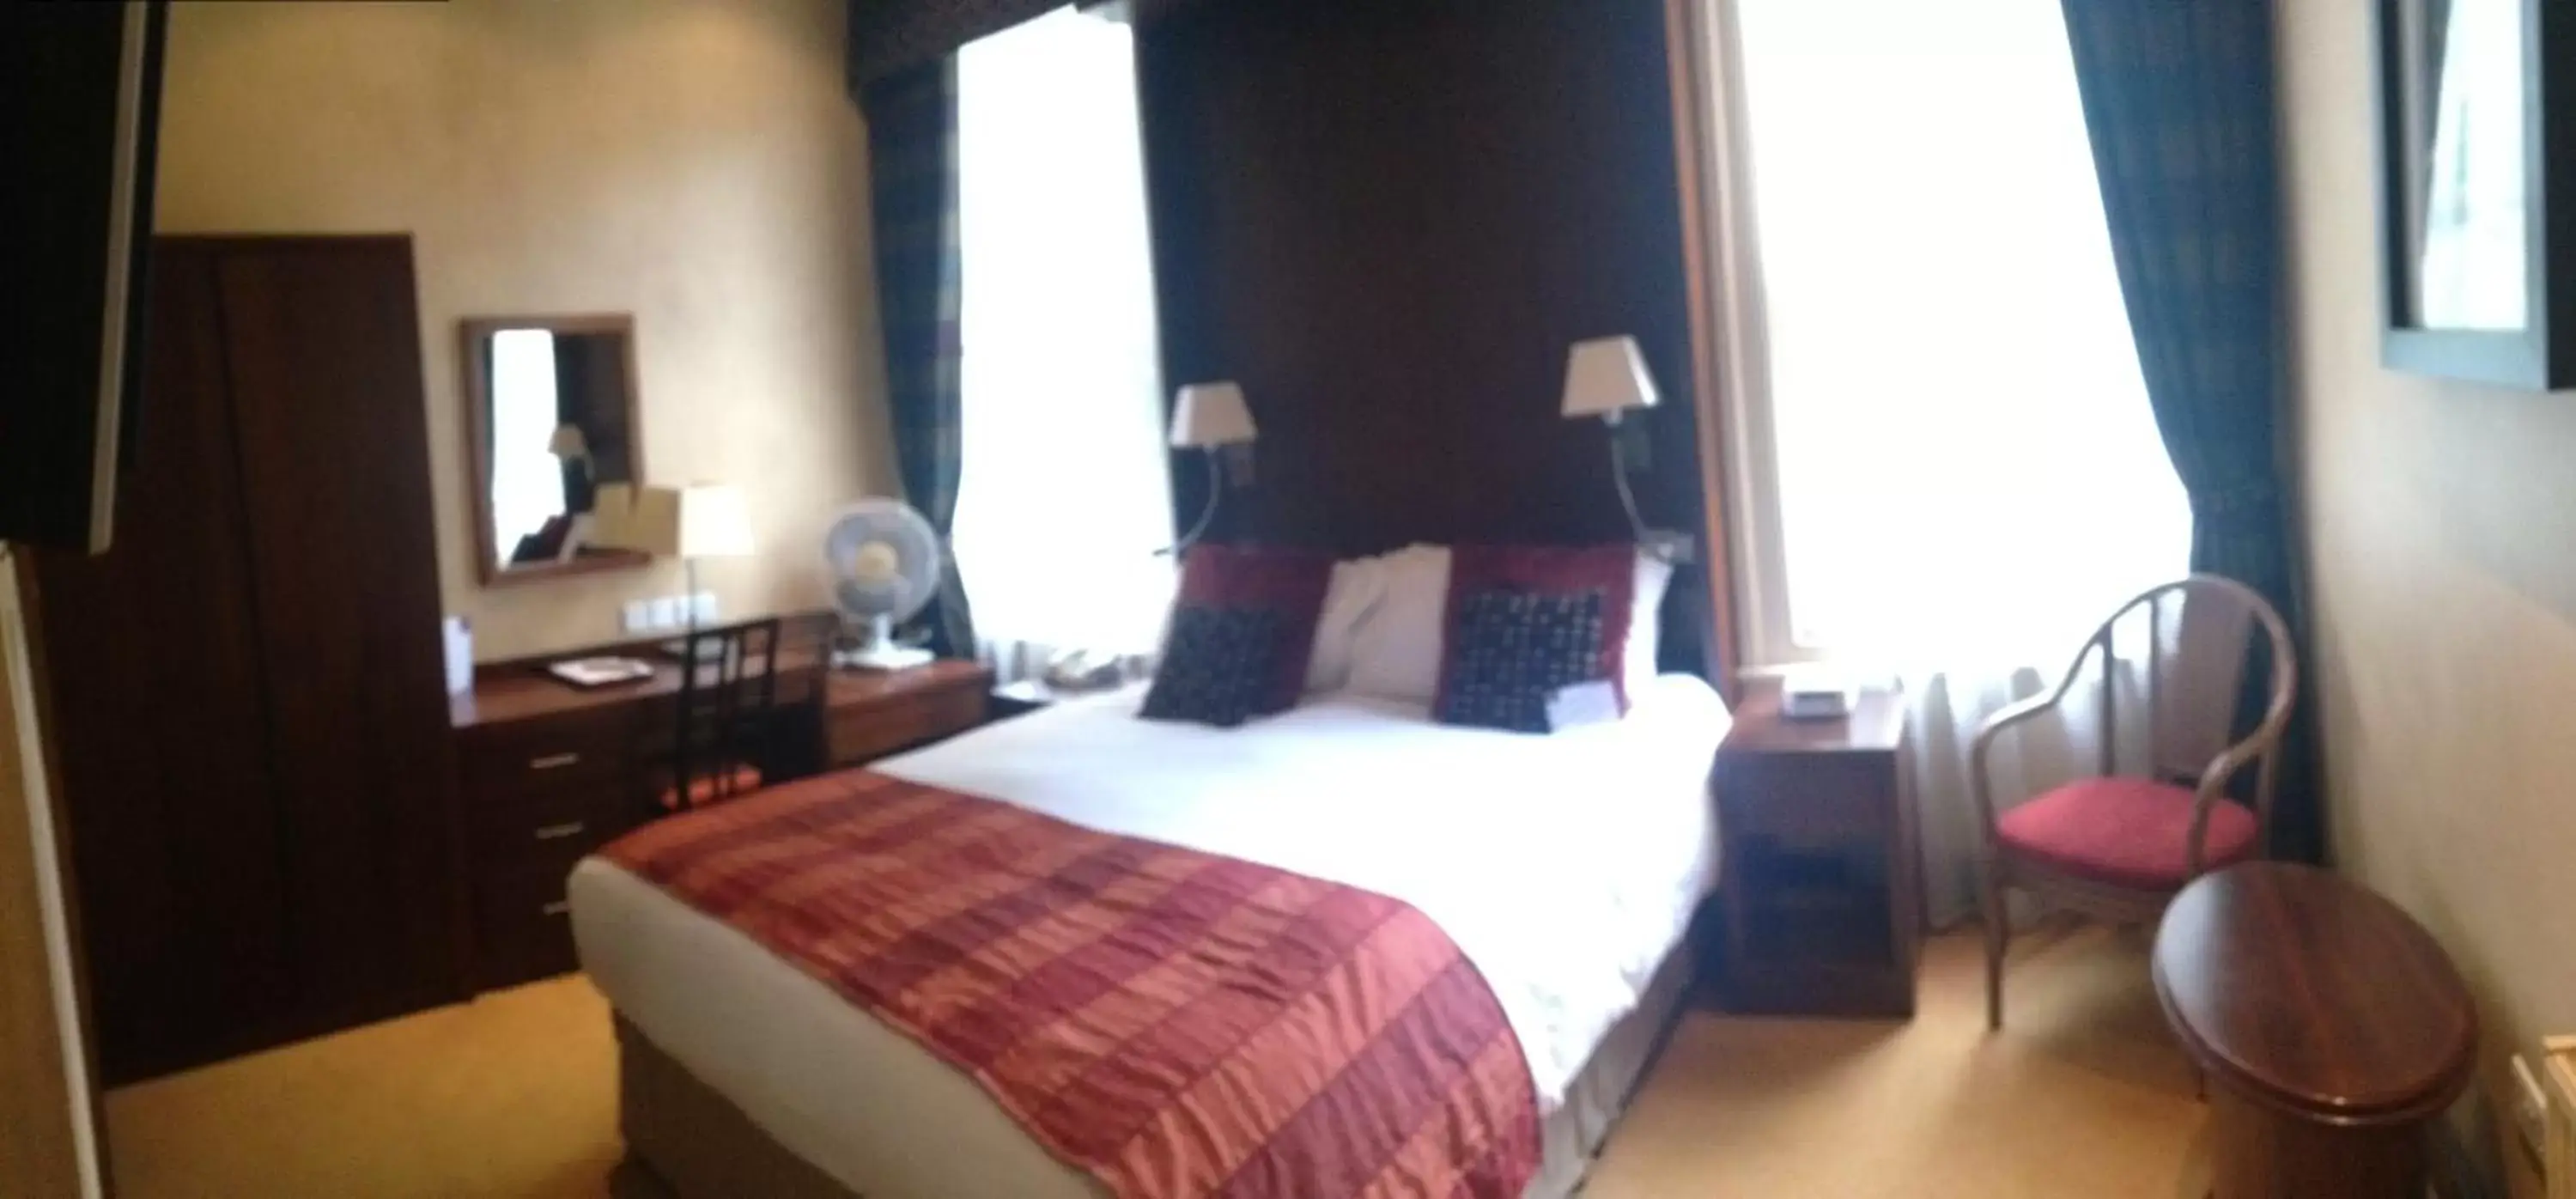 Suite in Belmont Hotel Leicester